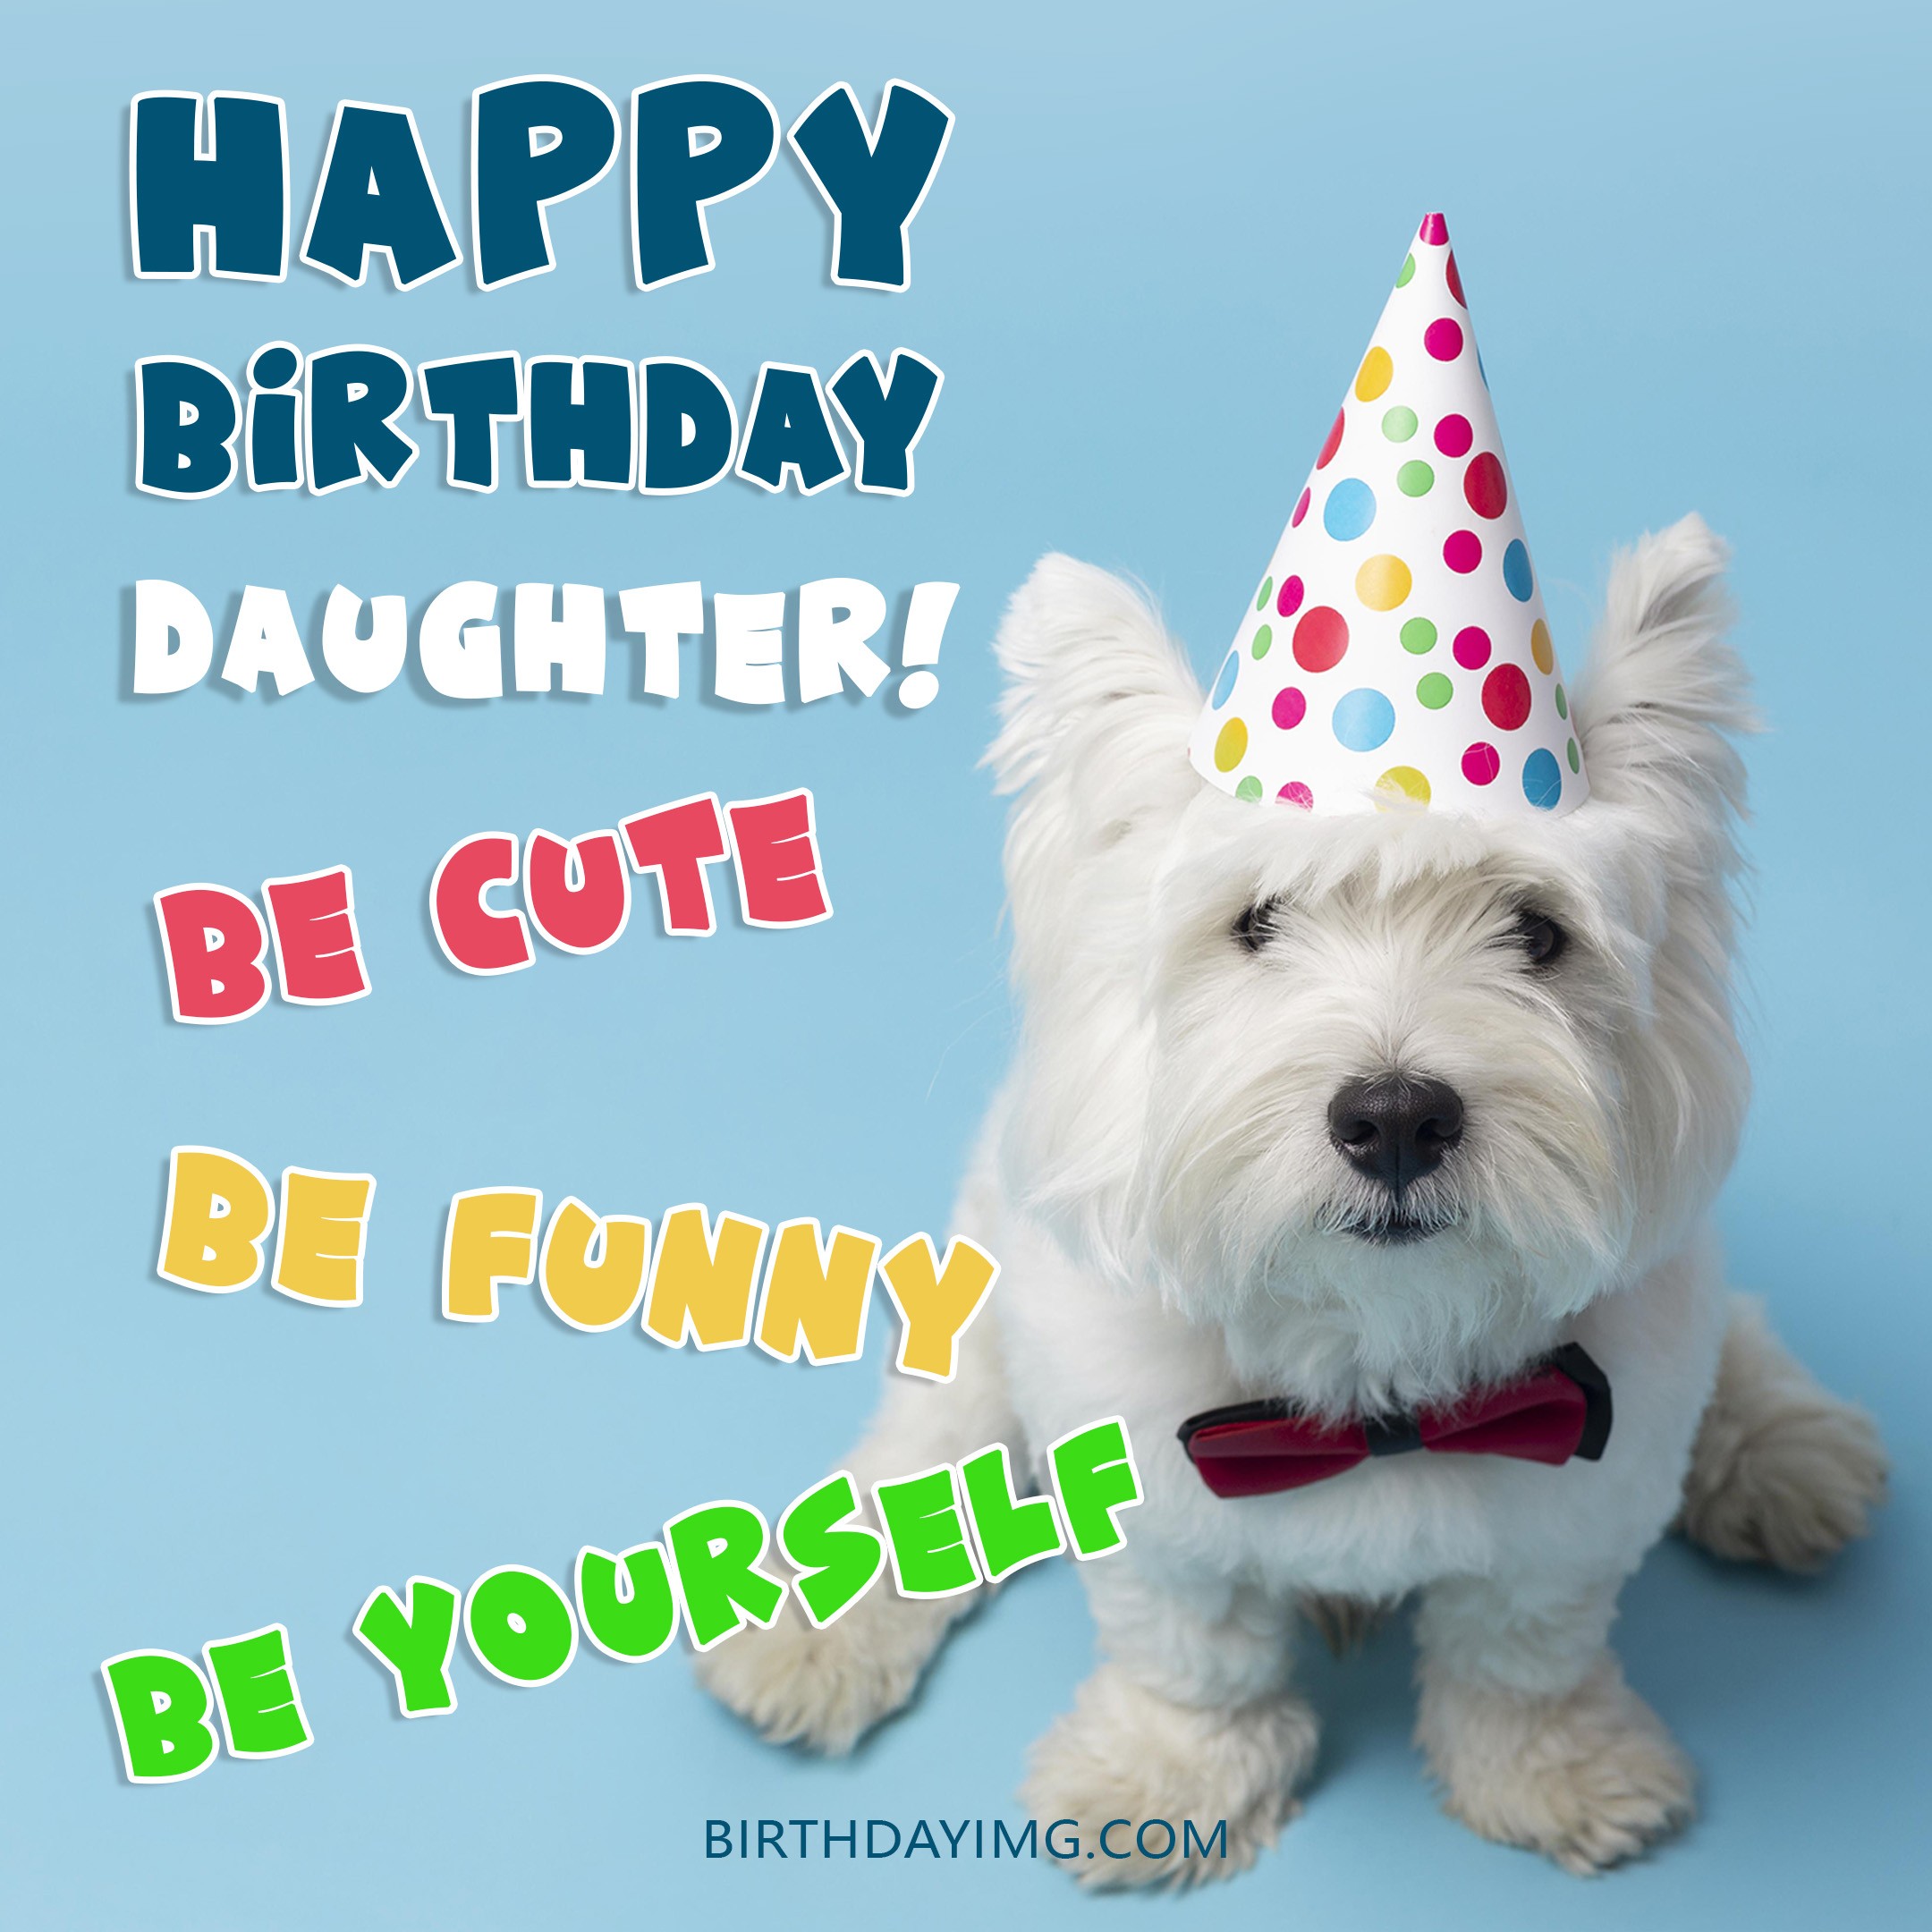 Free Cute Happy Birthday Image For Daughter With Dog 